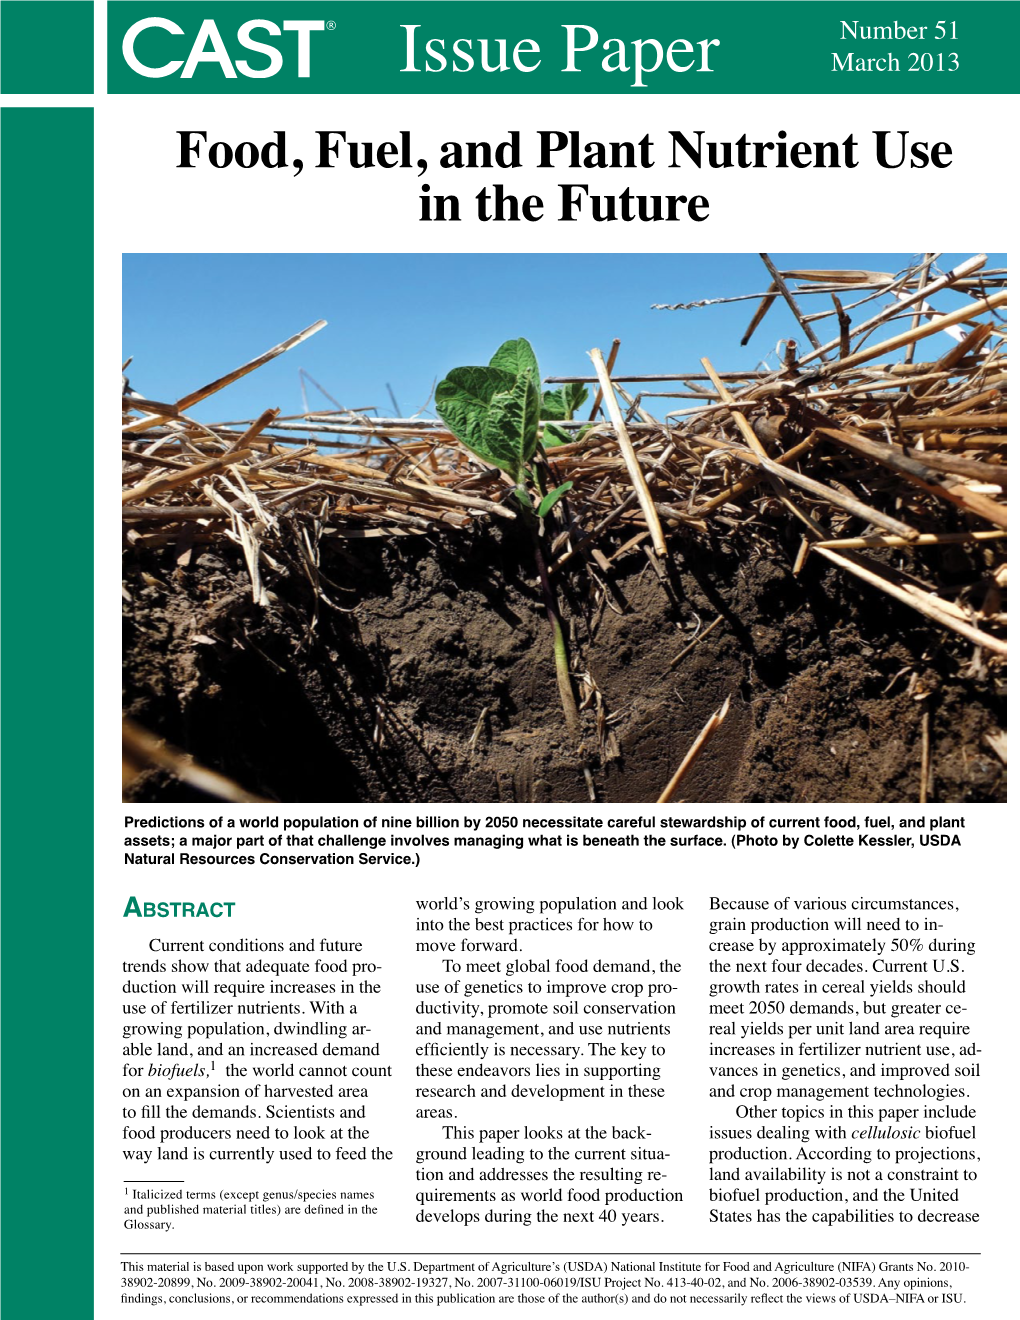 Food, Fuel, and Plant Nutrient Use in the Future